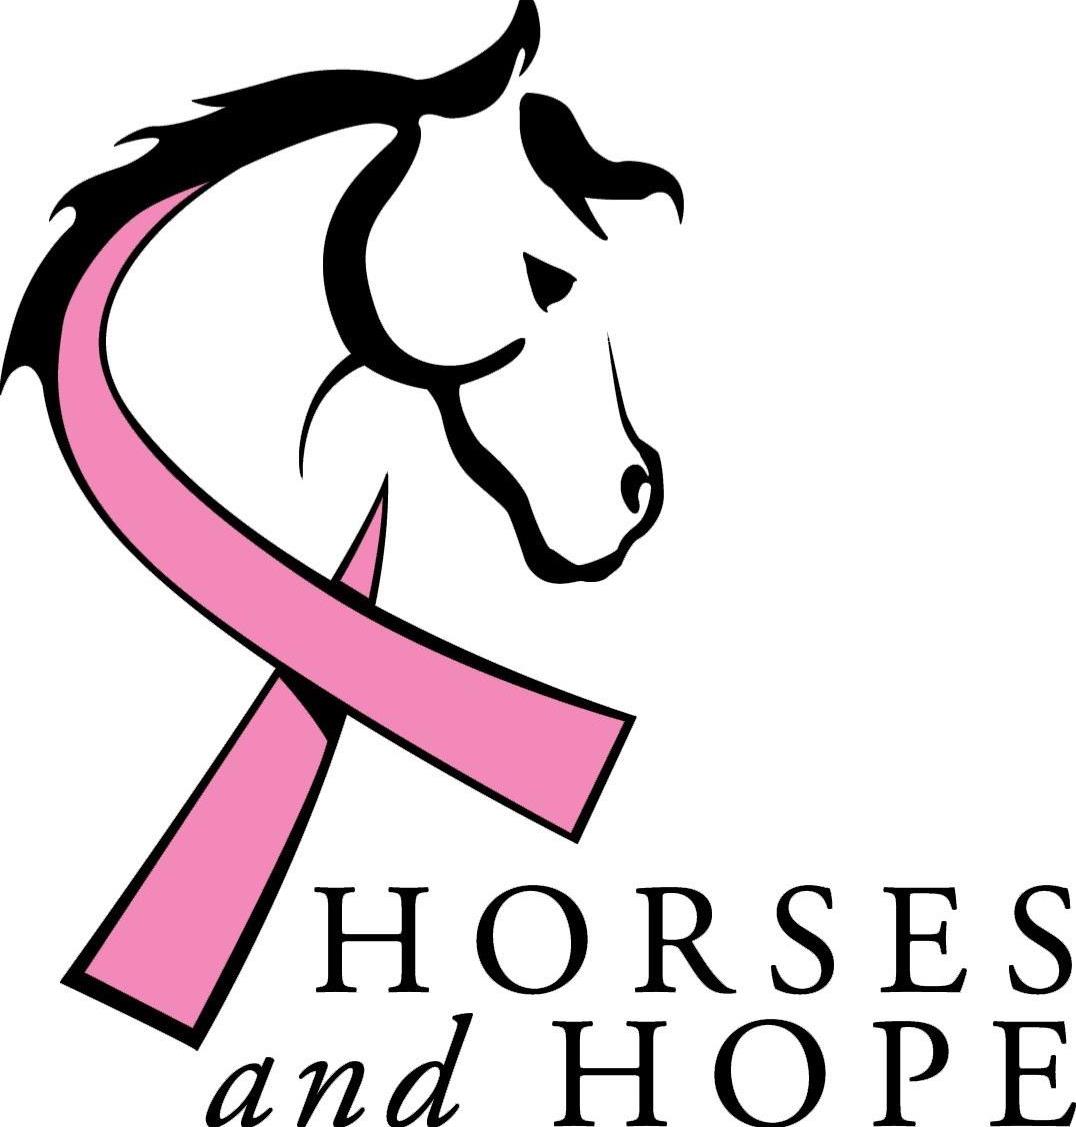 Horses and Hope, UofL Kentucky Cancer Program host Breast Cancer Awareness Day at Keeneland